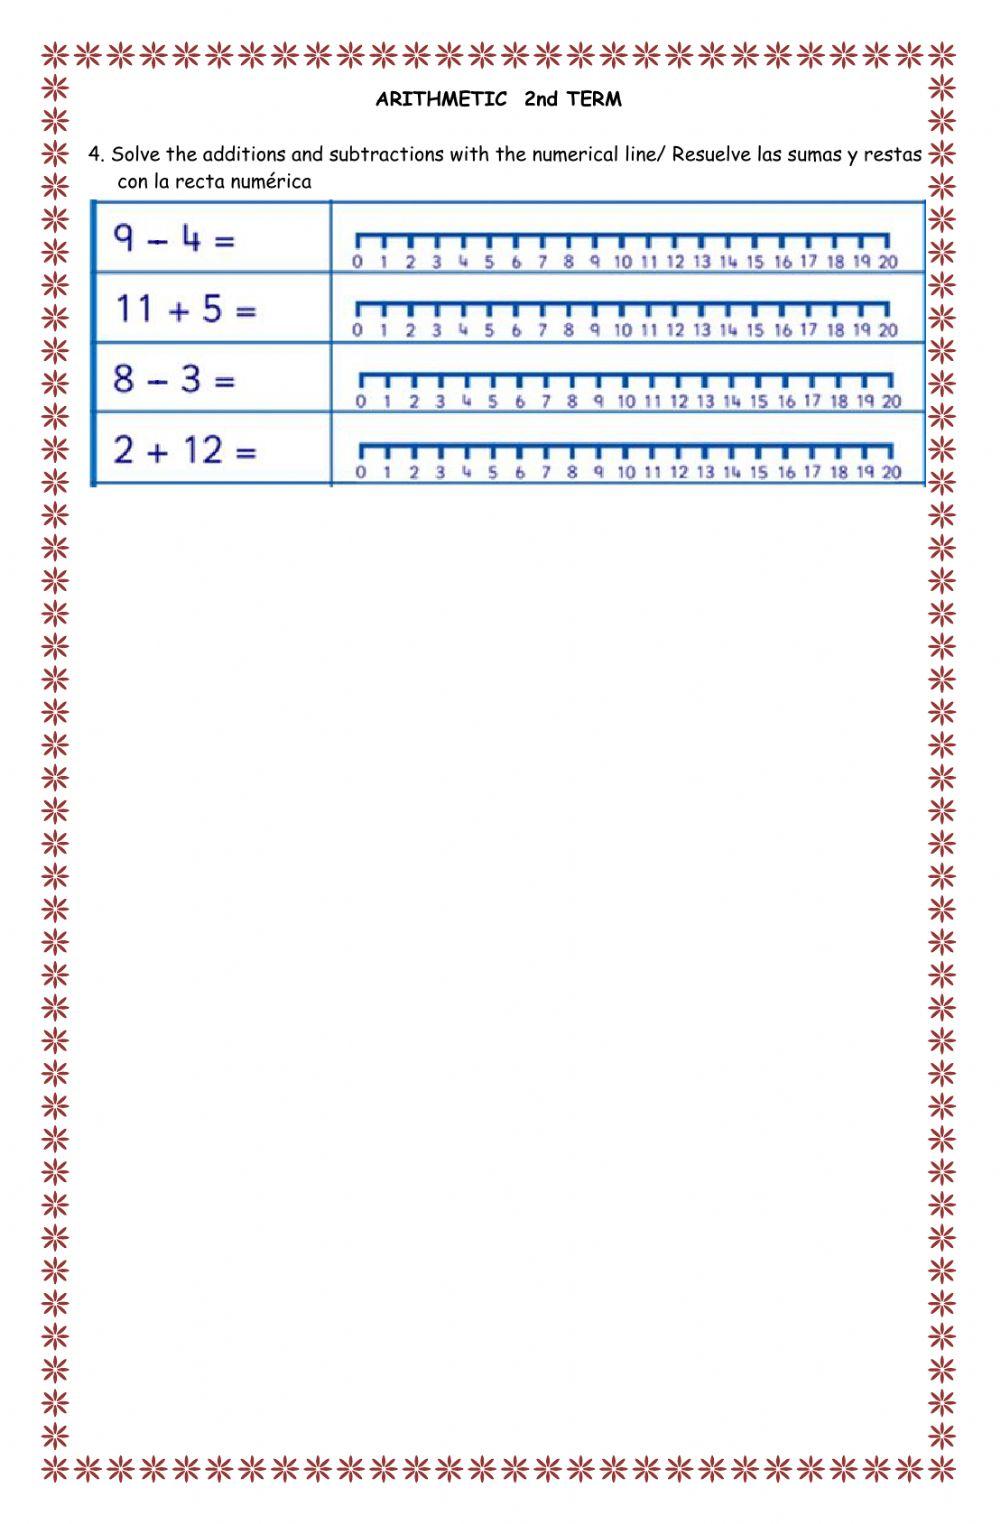 Evaluation second term first grade Arithmetic